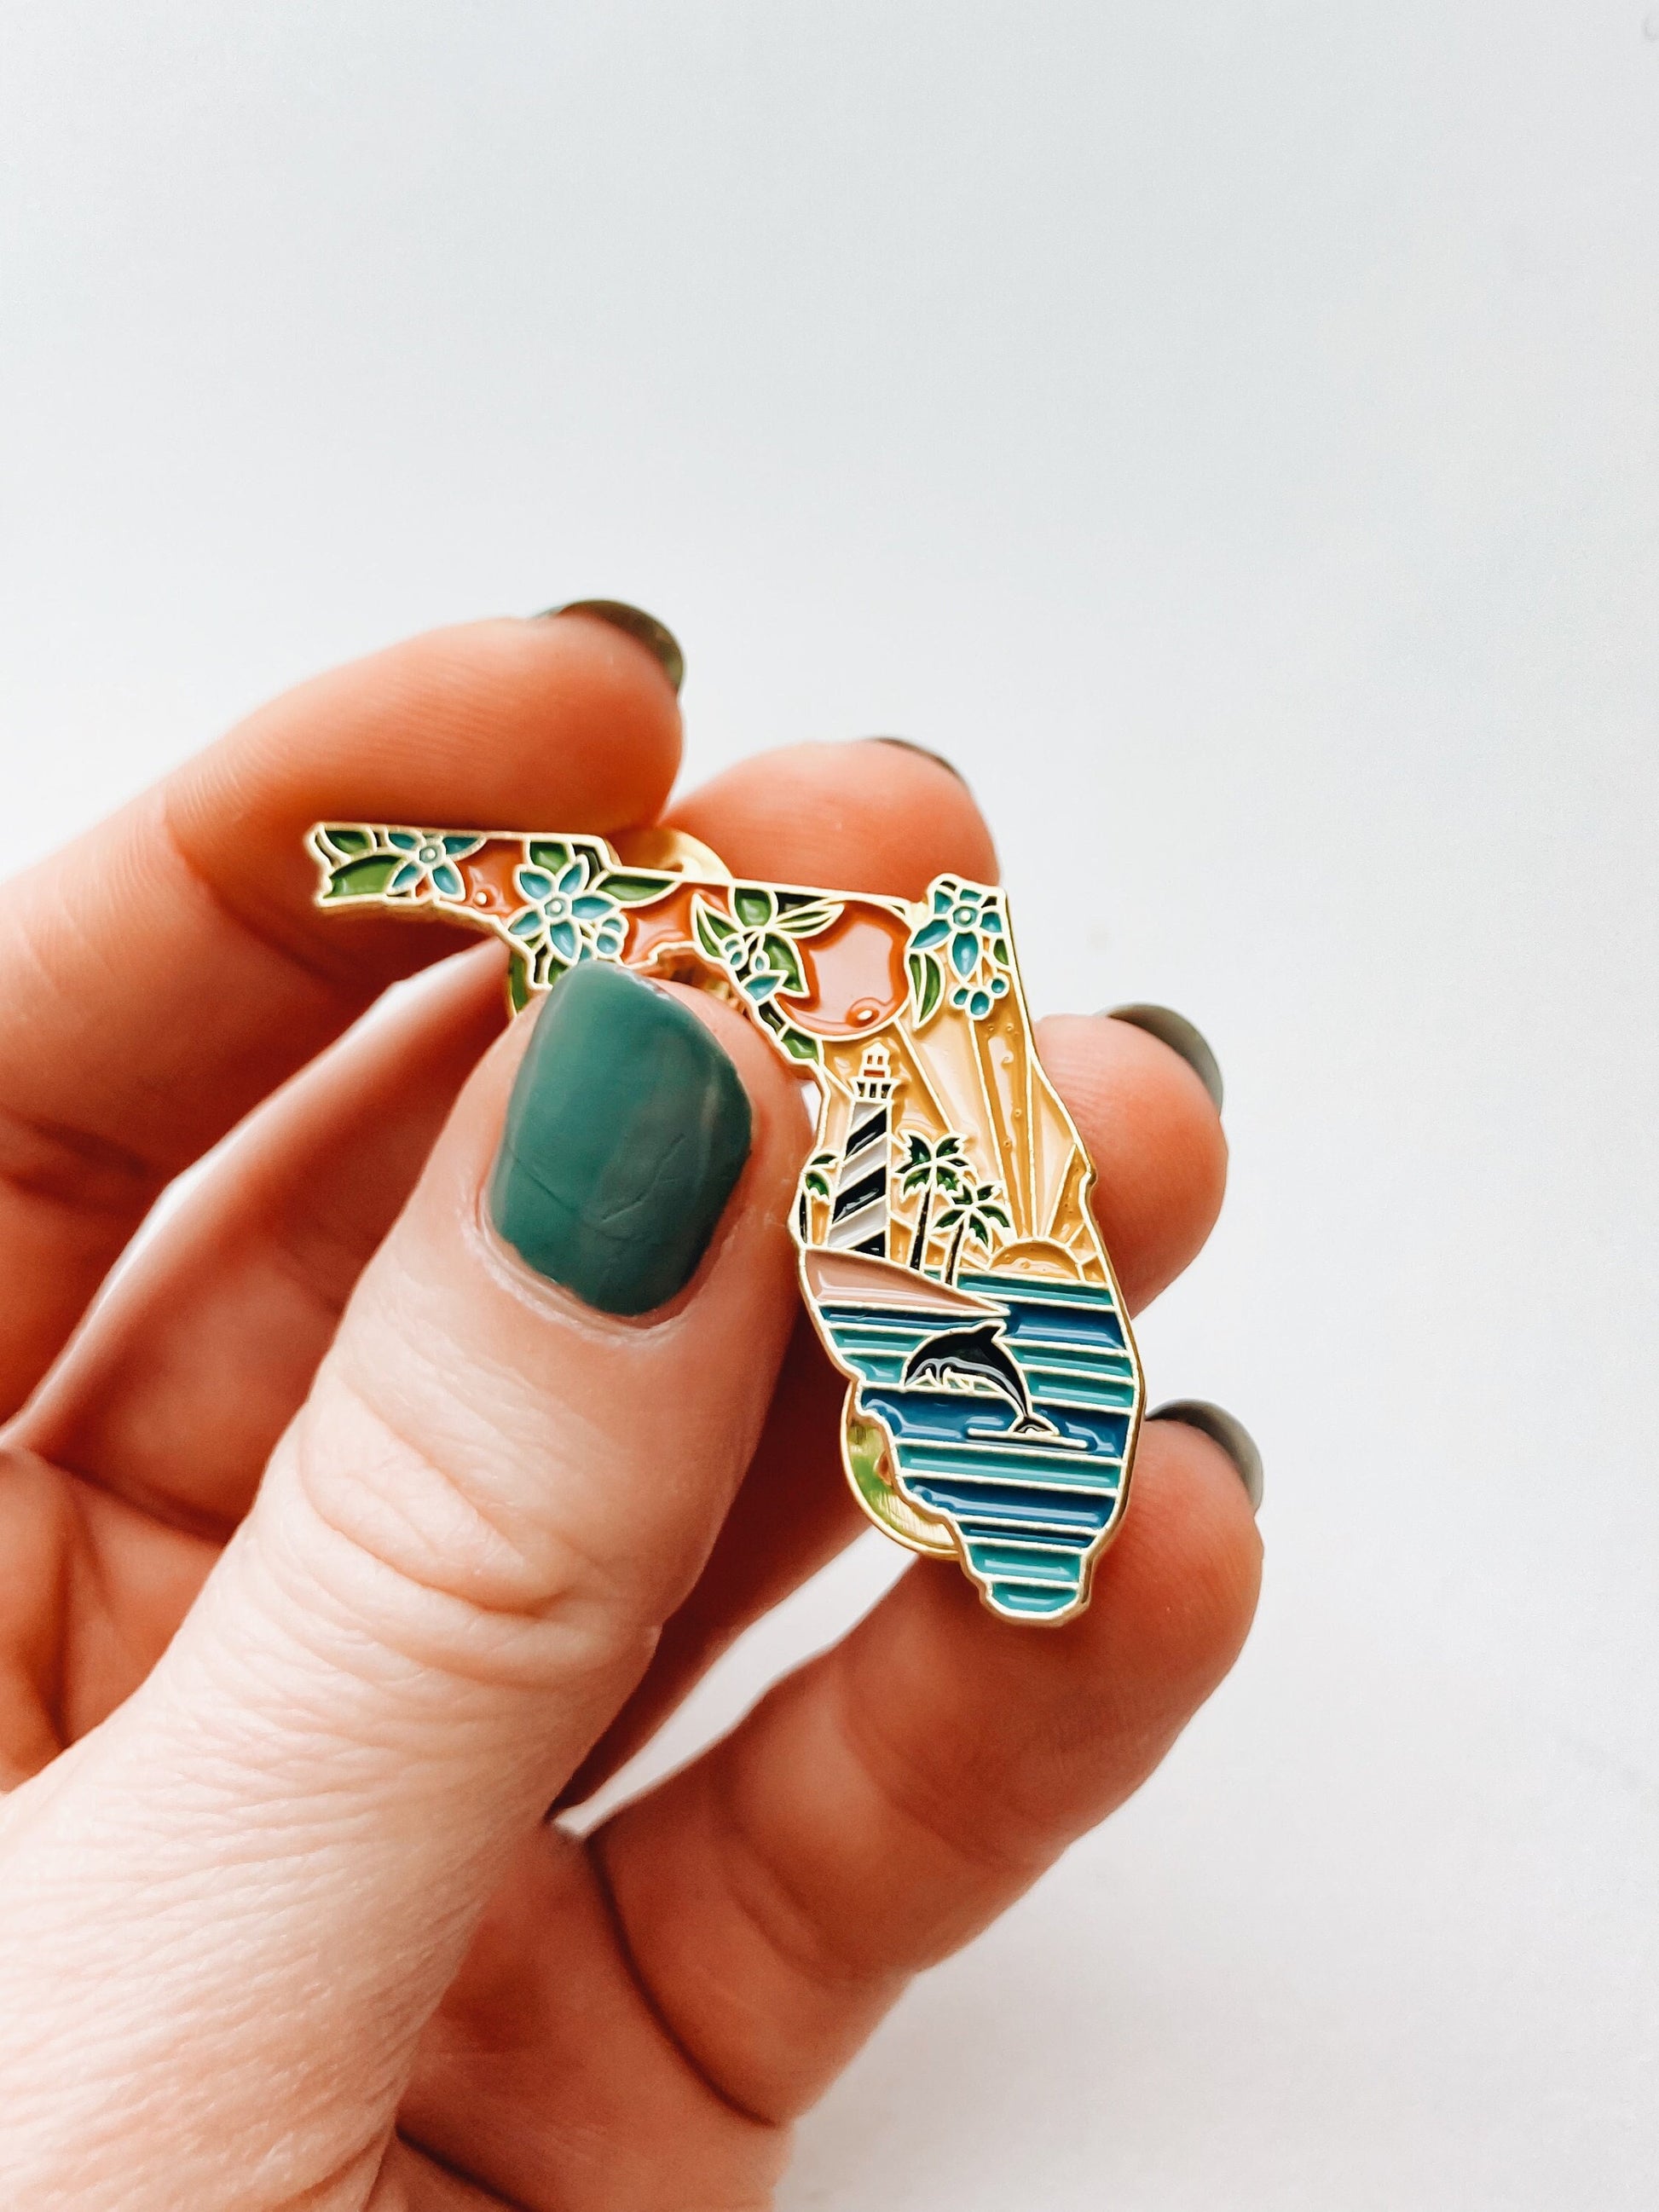 Florida Enamel Pin | Gold Soft Enamel Pin | Illustrated United State Pin | Butterfly Clasp | 1.25"